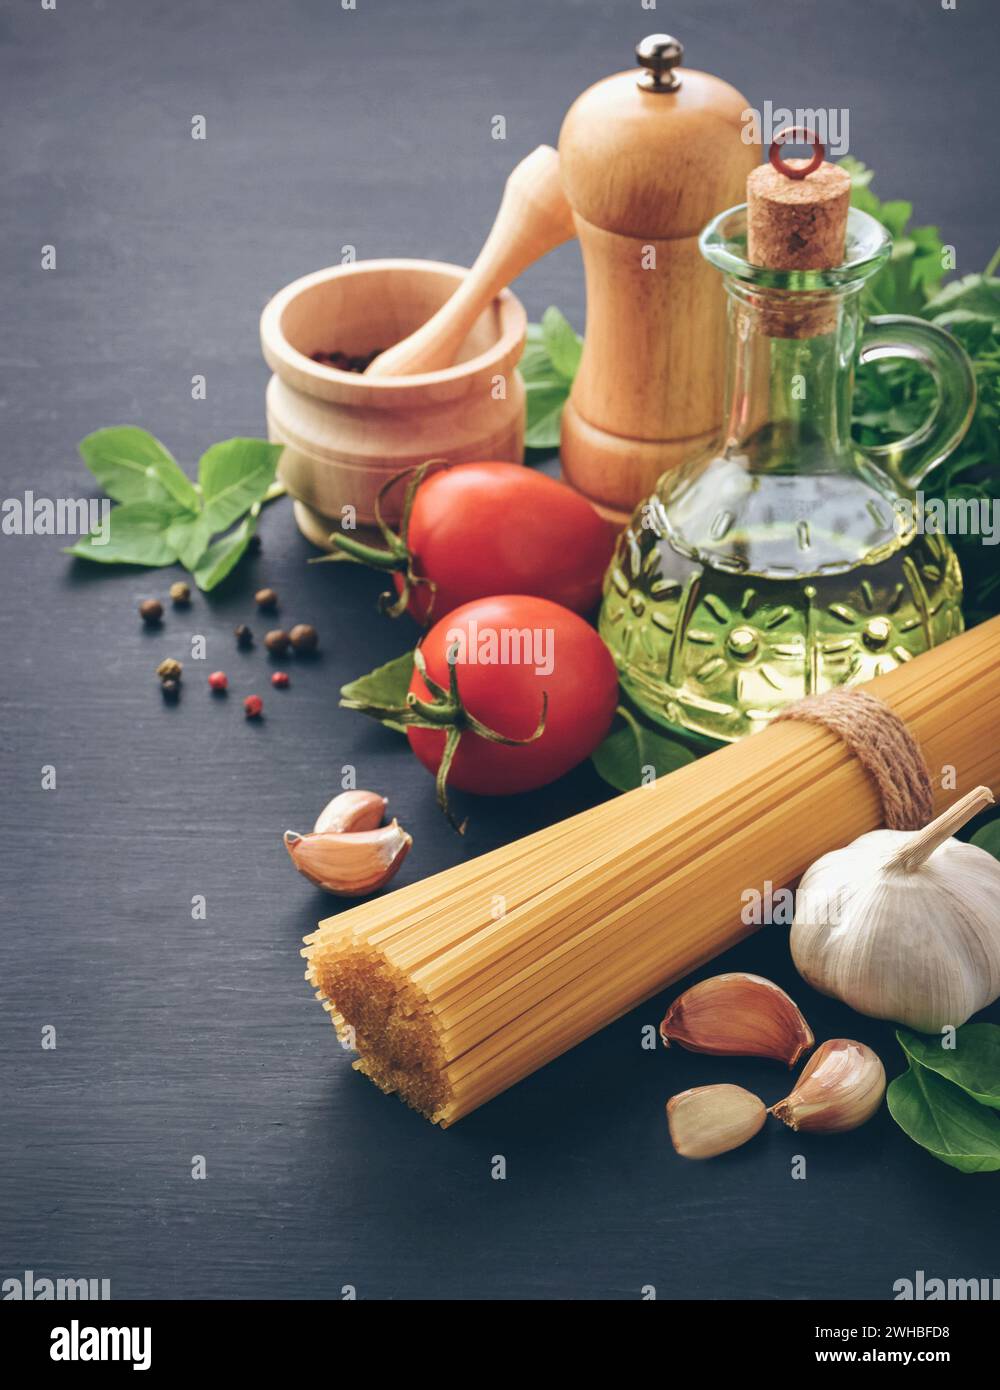 Ingredients for cooking pasta spaghetti alla puttanesca - italian pasta dish with tomatoes, black olives, capers, anchovies and parsley. Stock Photo